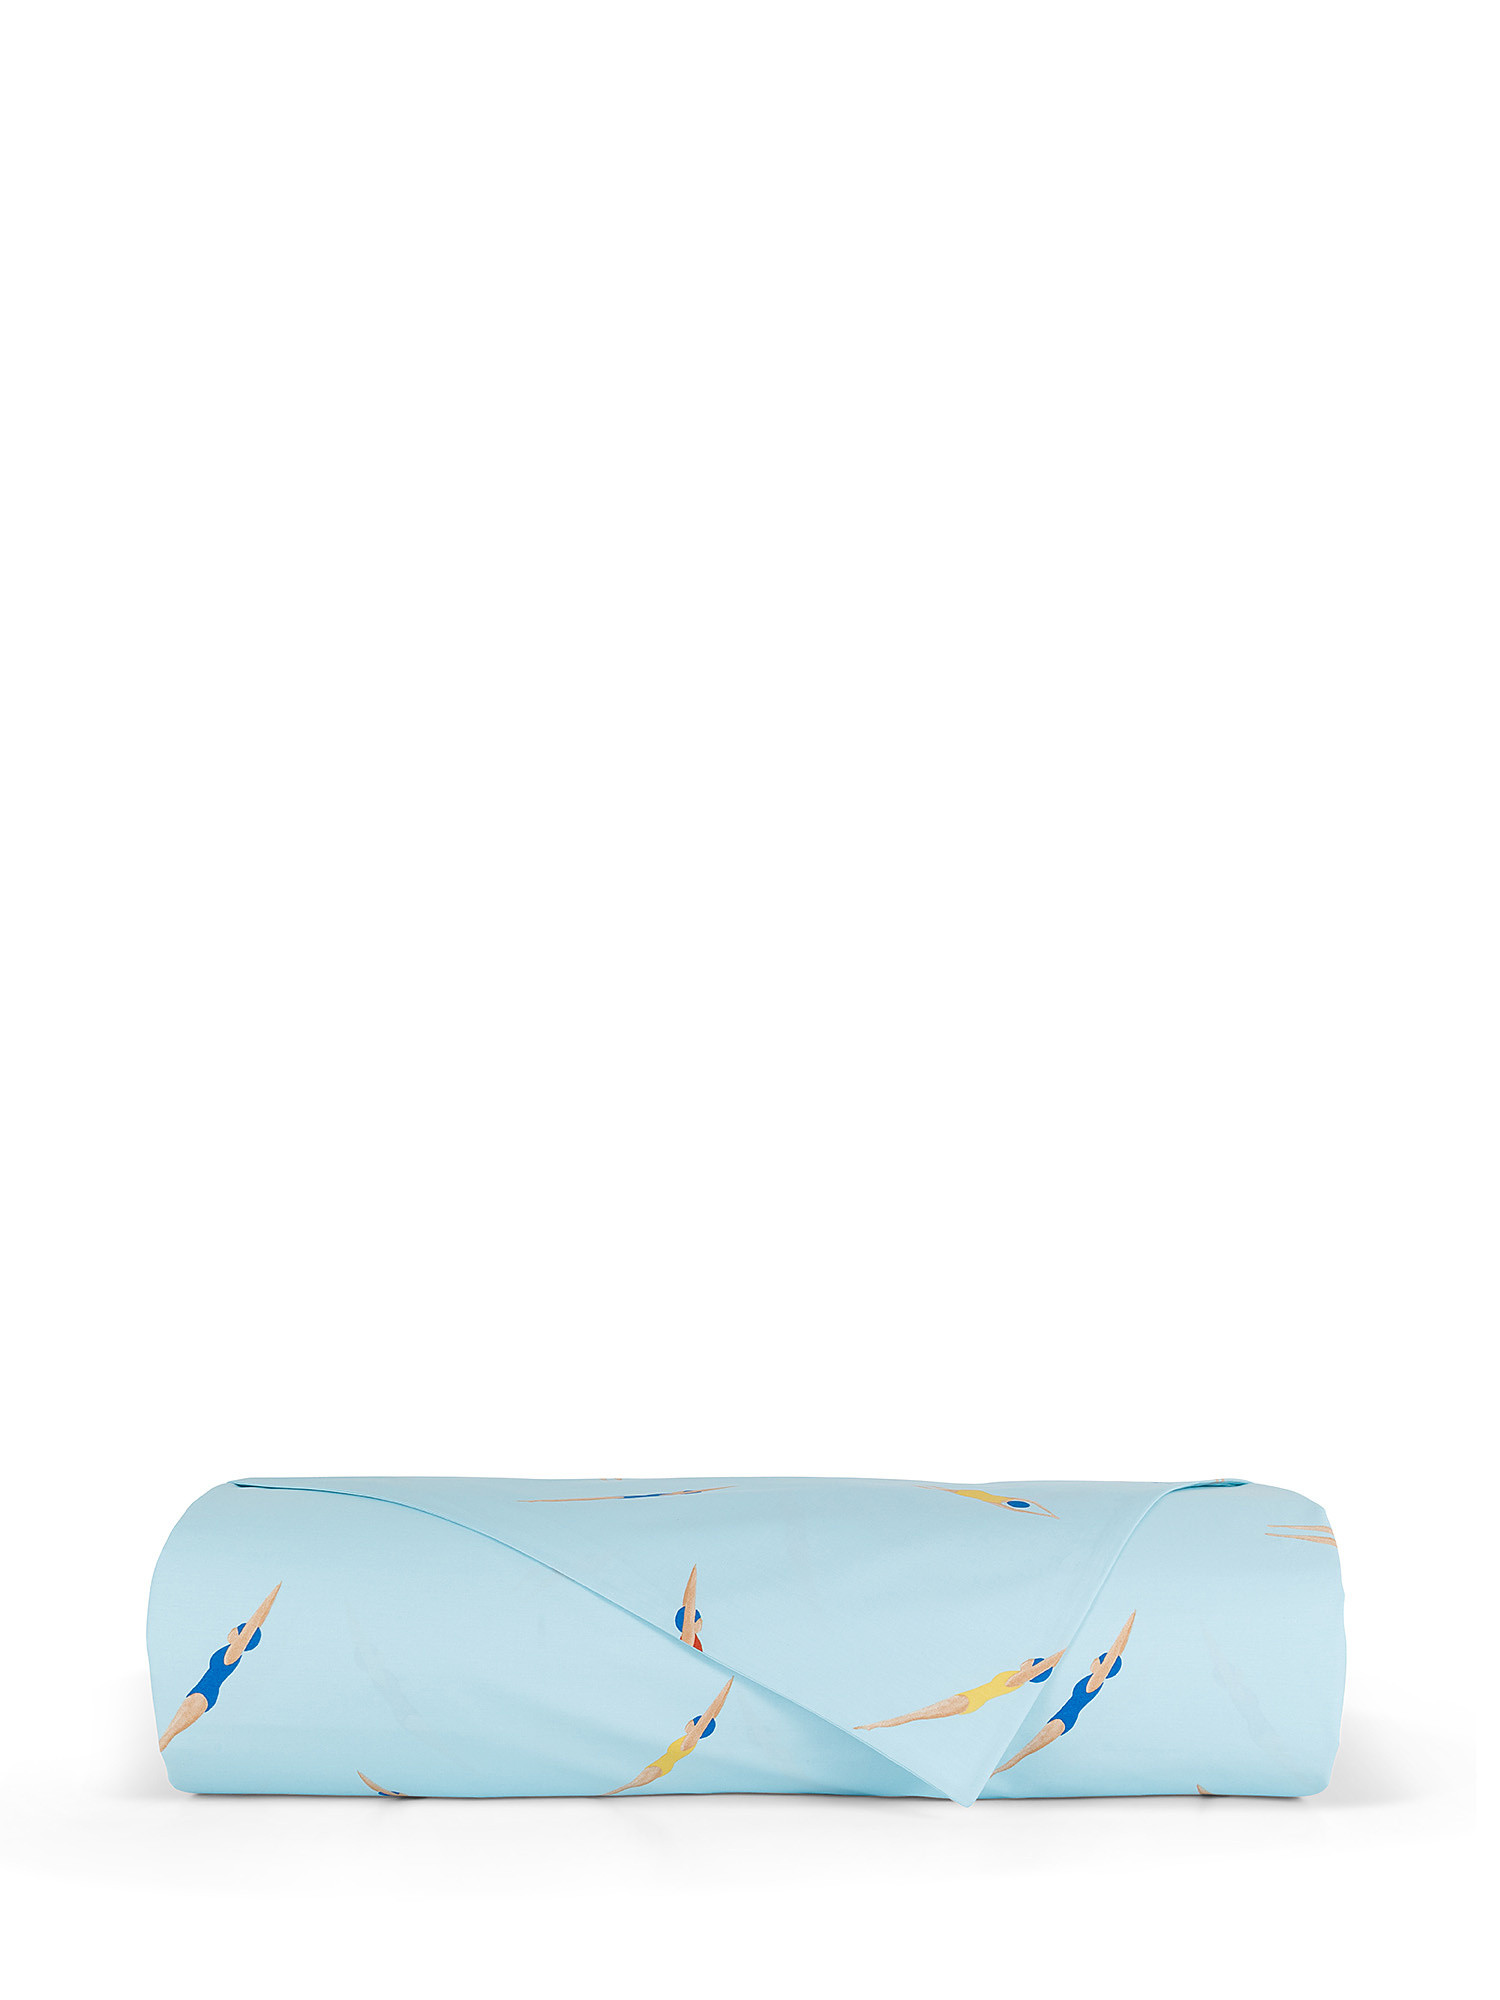 Cotton percale duvet cover with swimmers pattern, Light Blue, large image number 1